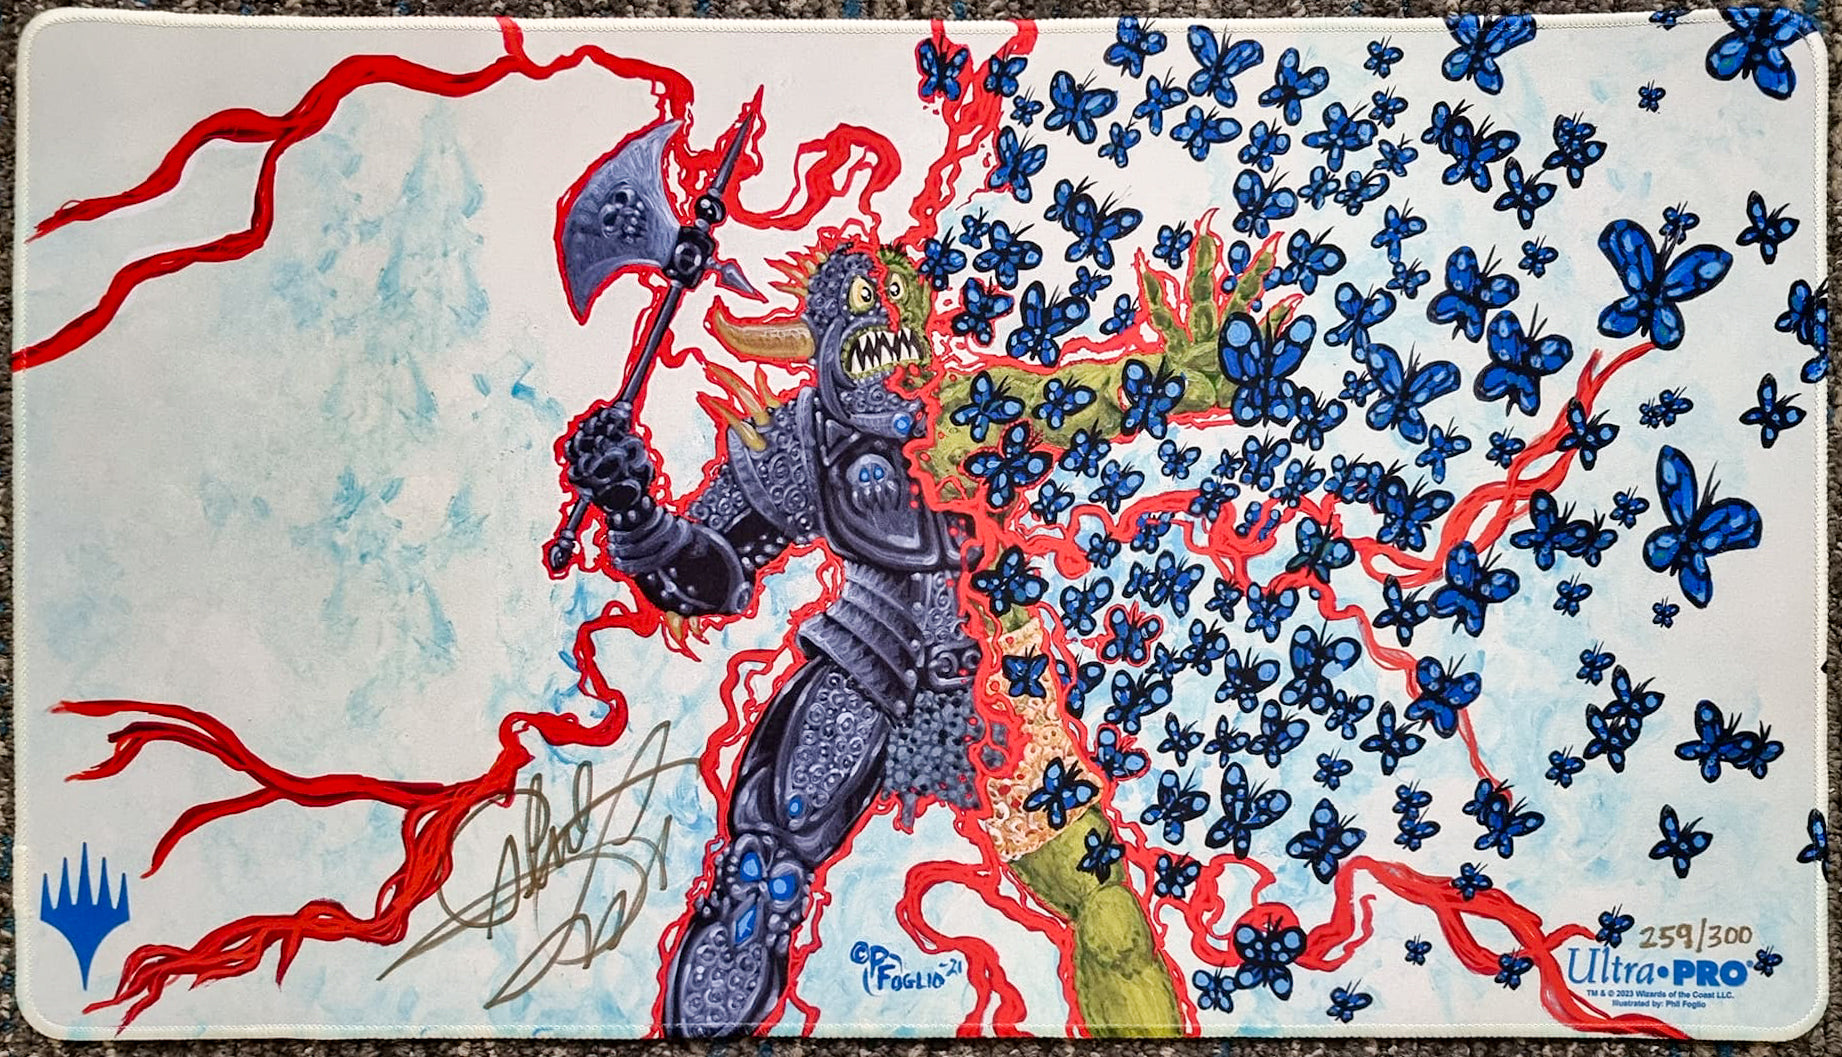 Chaos Warp - Phil Foglio - Limited Edition [300 Copies] - Embroidered - Signed by the Artist - MTG Playmat